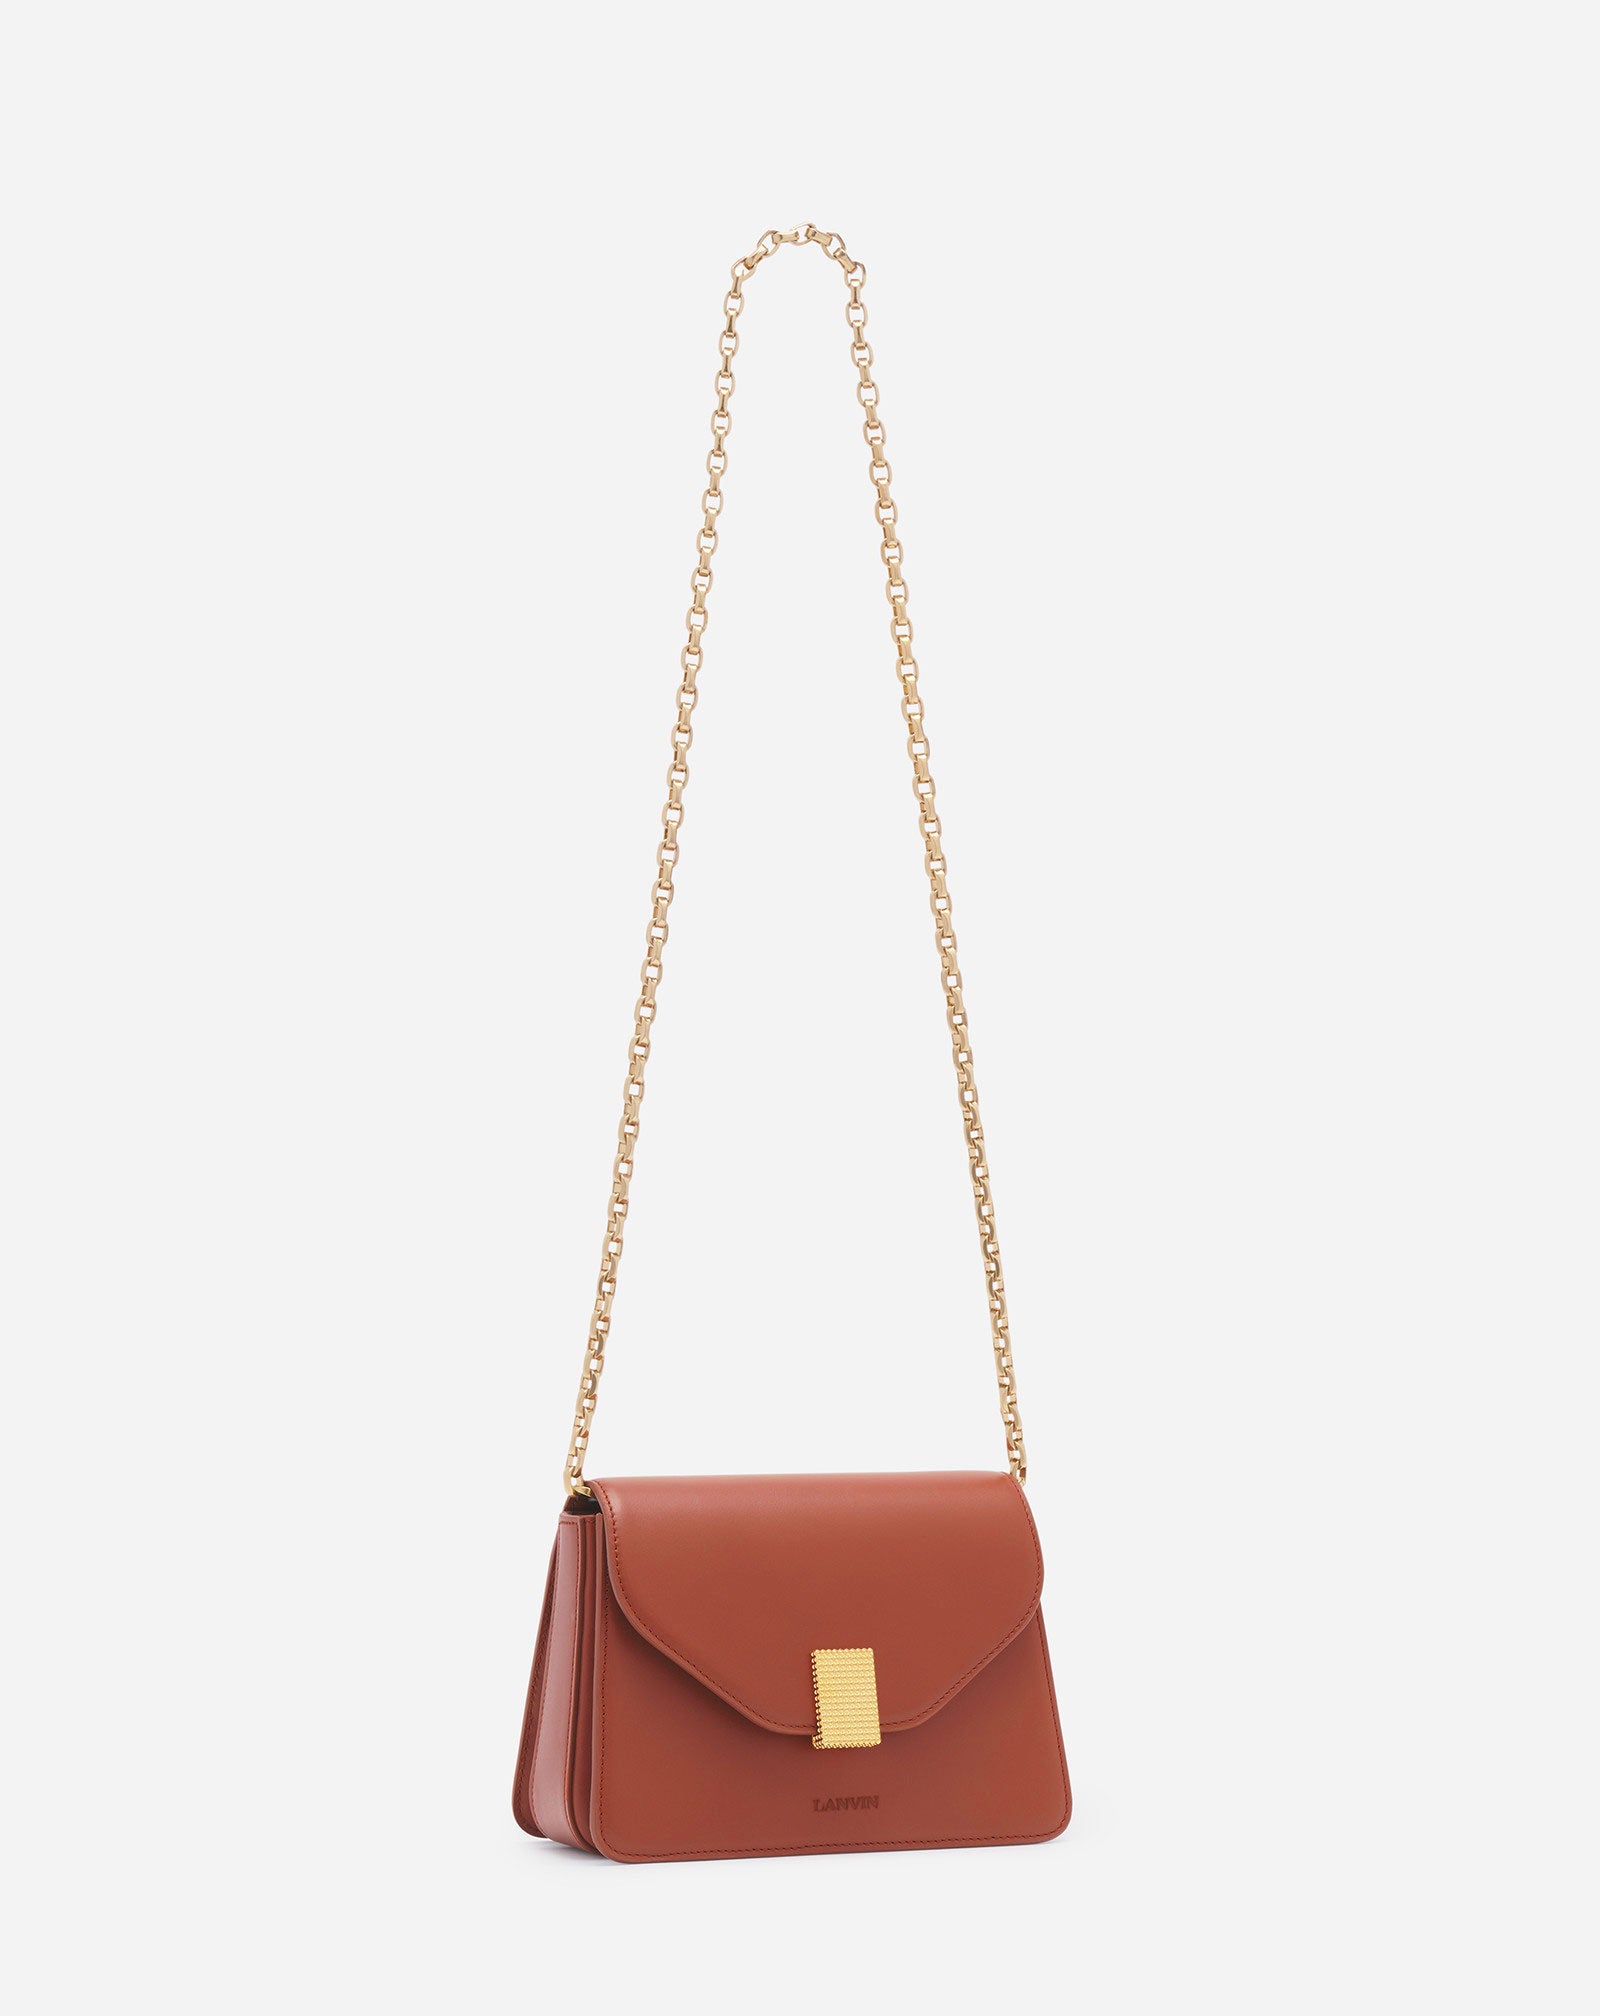 Concerto Leather Bag for Female - Red - One Size - Lanvin